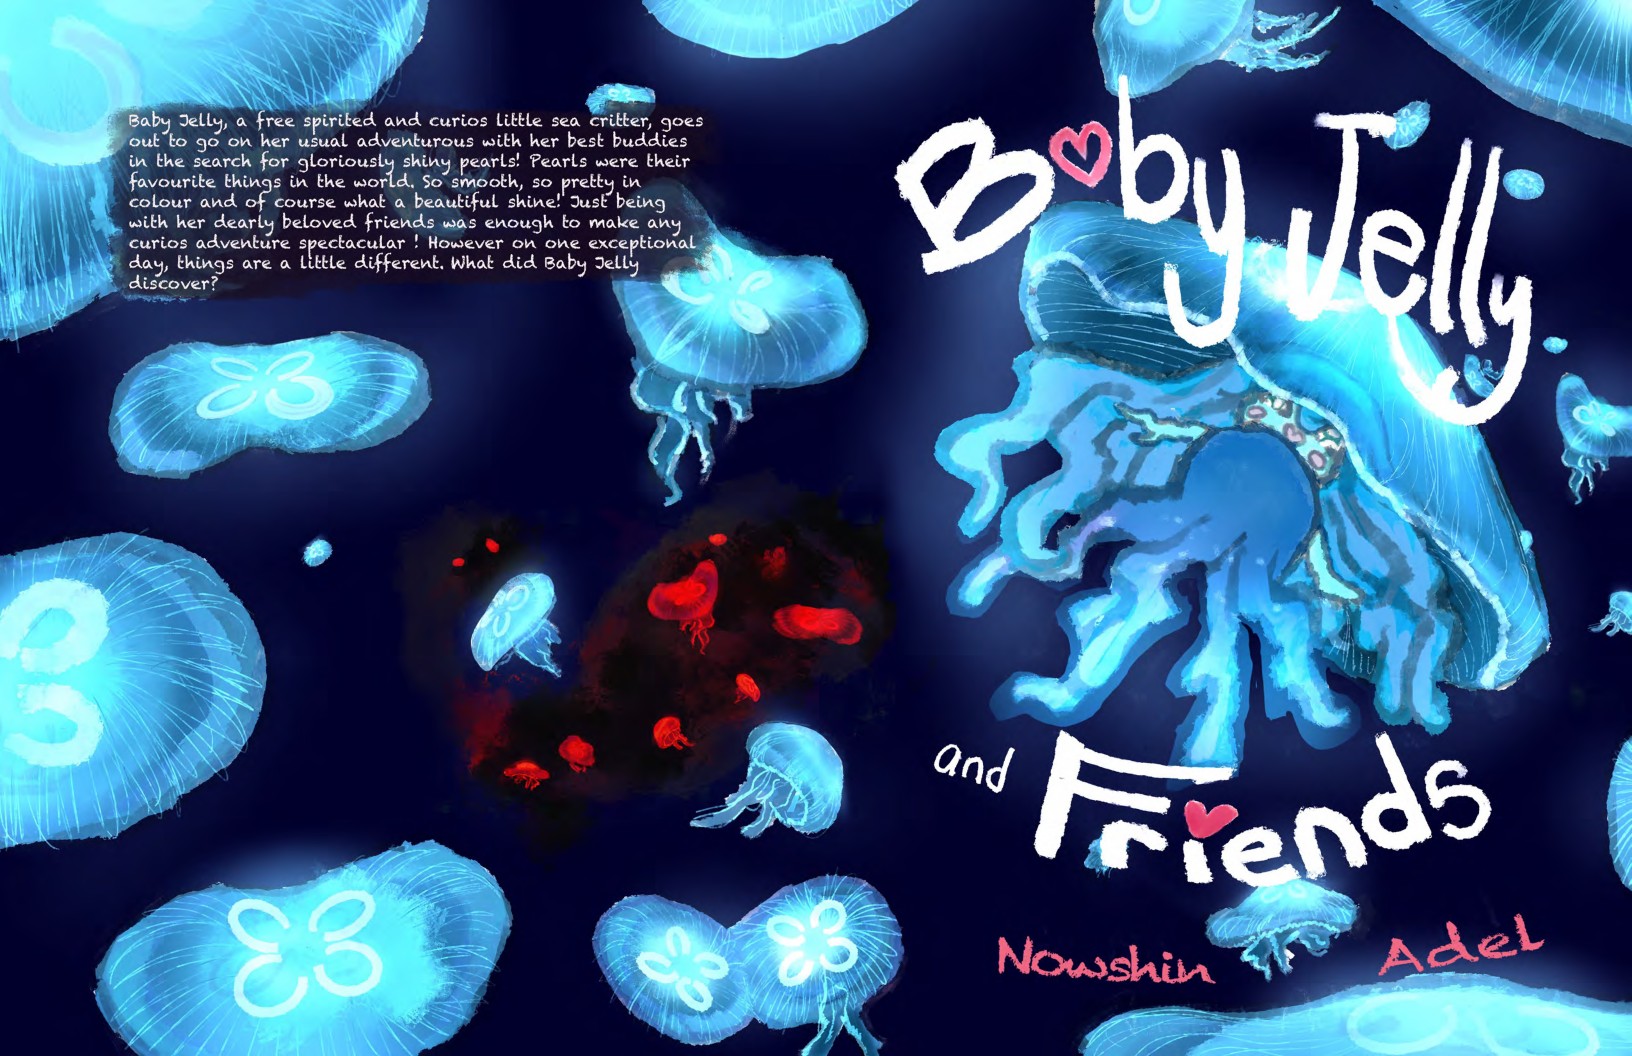 Baby Jelly and Friends Adult Children's Book